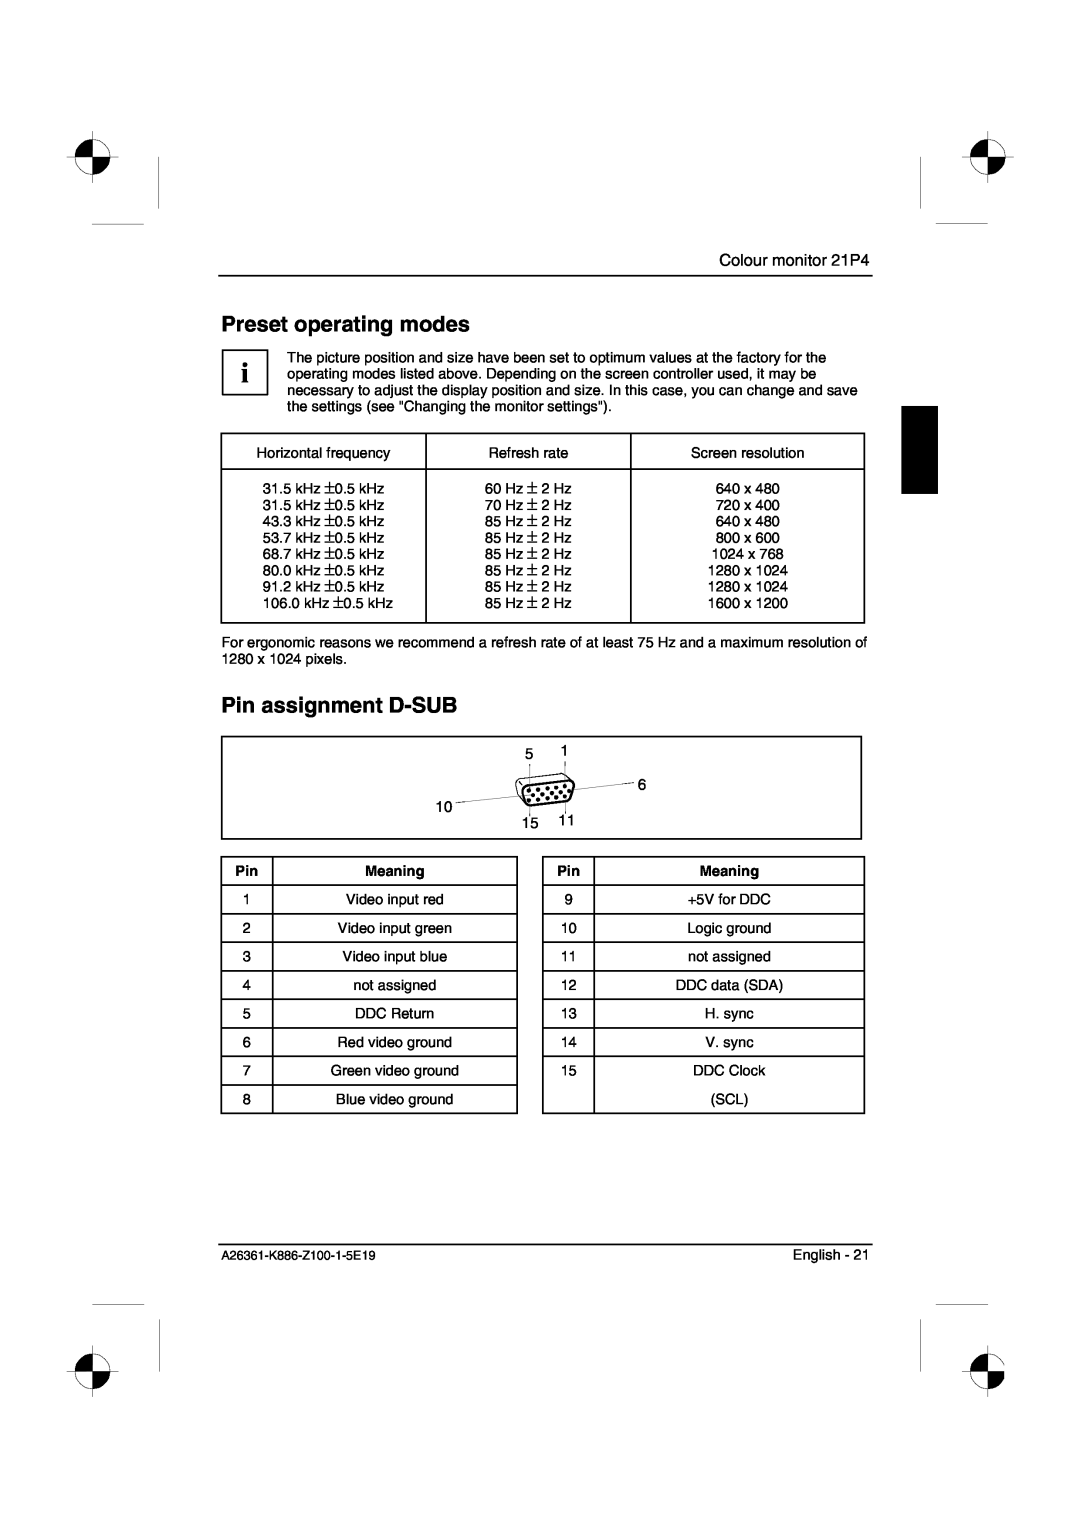 Fujitsu Siemens Computers manual Preset operating modes, Pin assignment D-SUB, Meaning, Colour monitor 21P4 